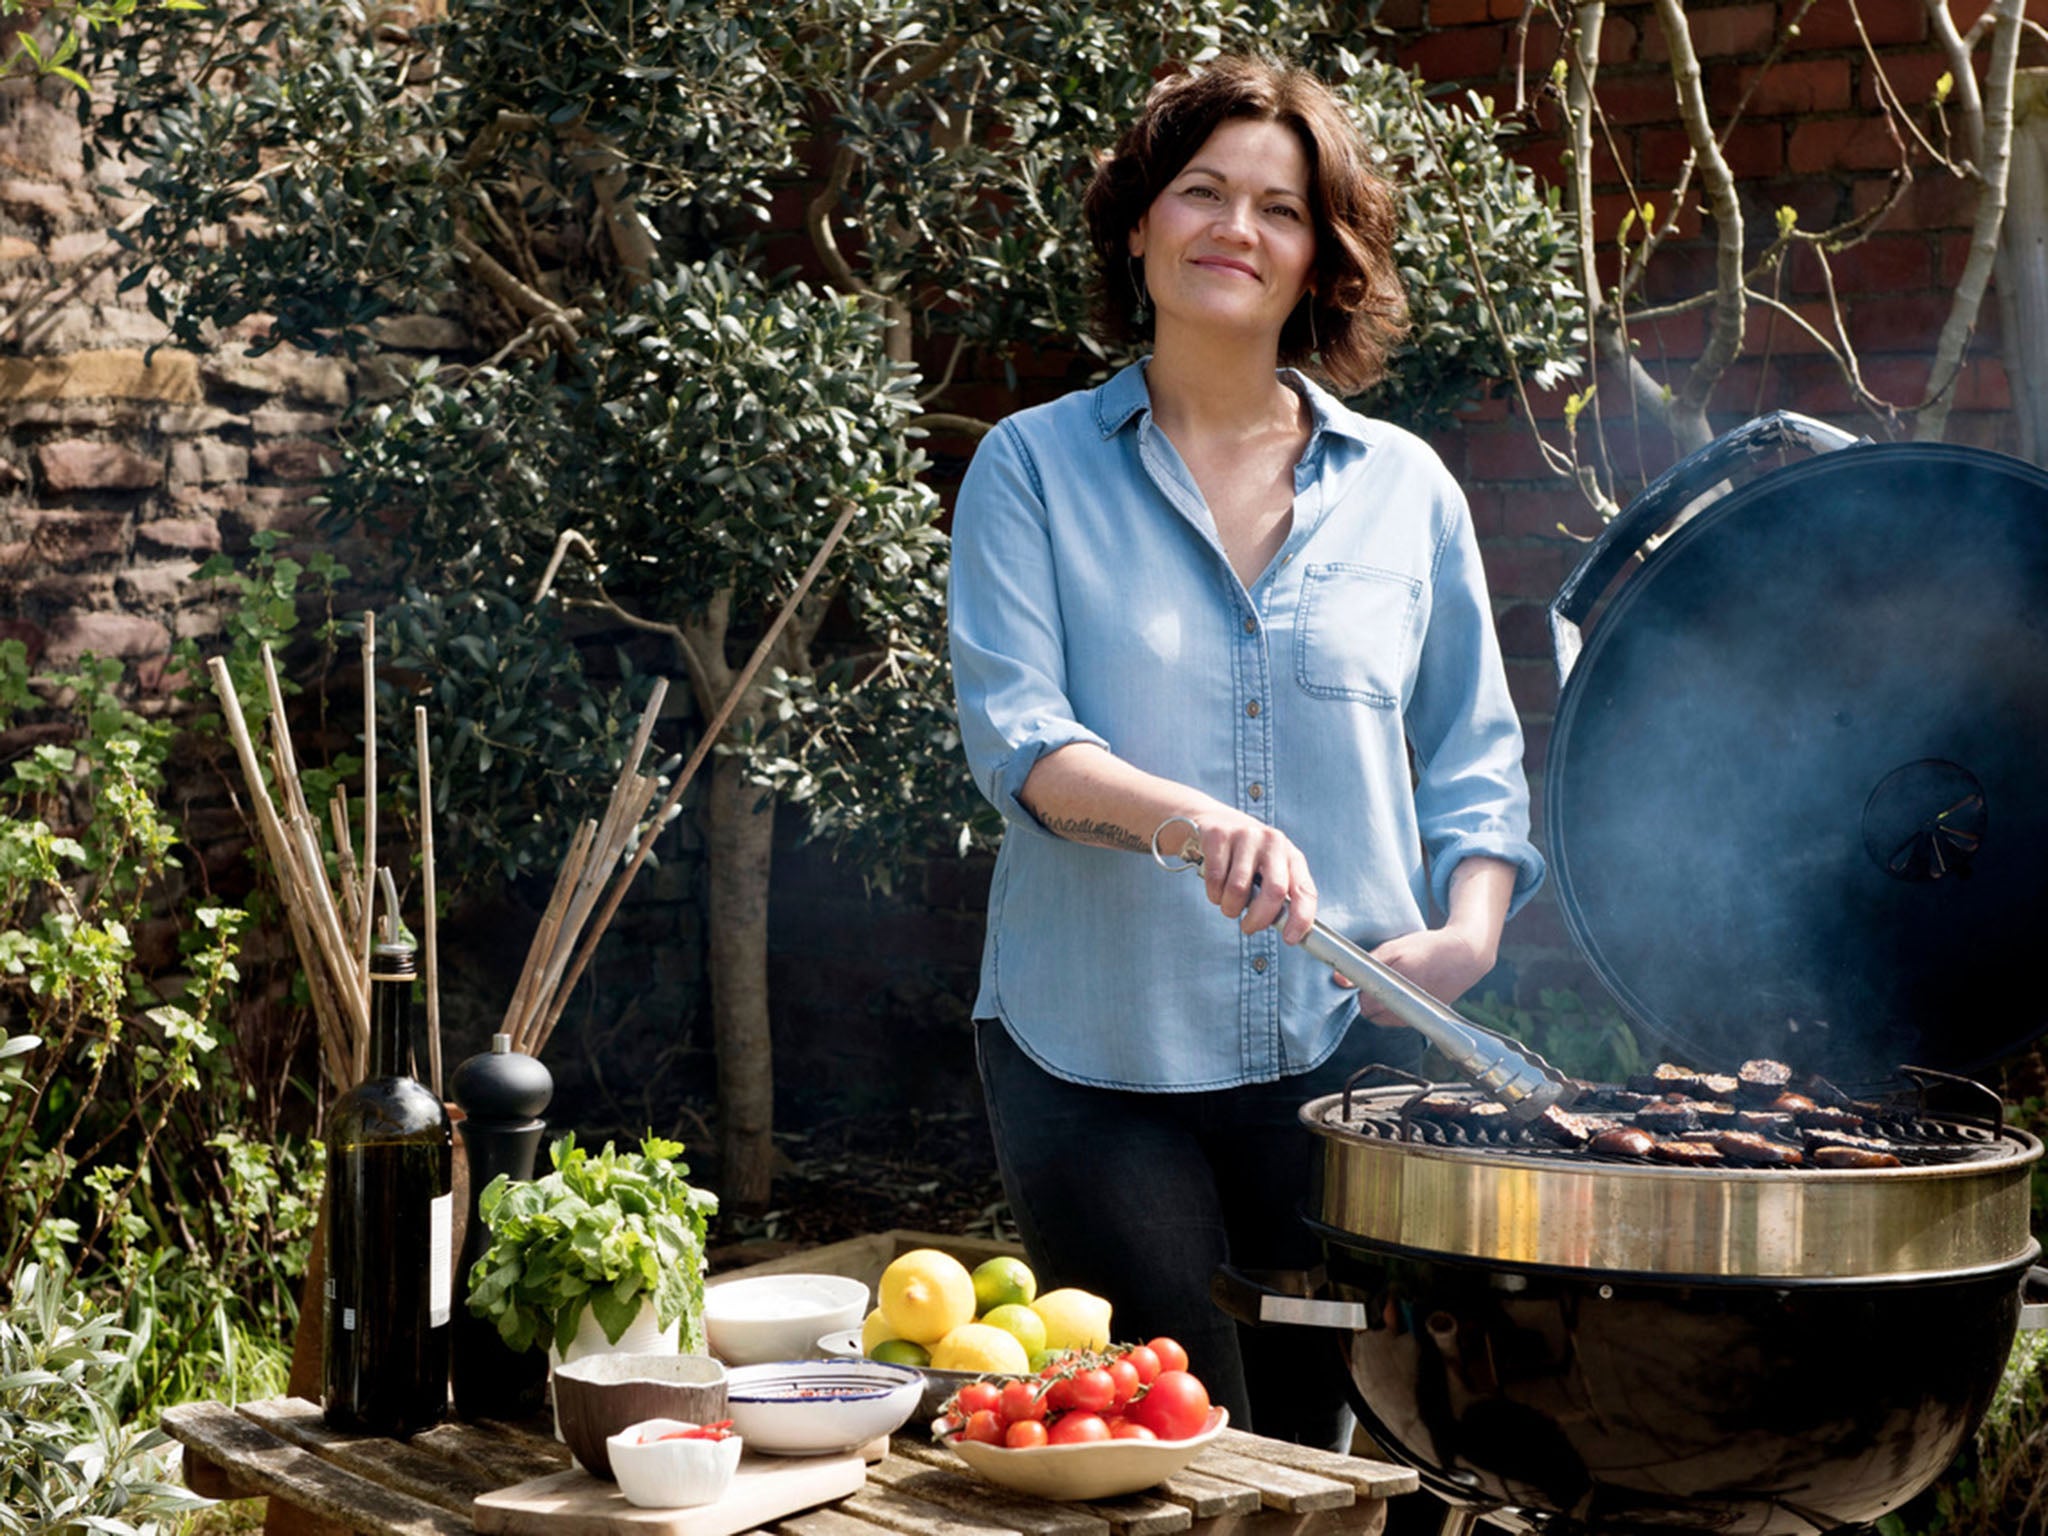 Genevieve Taylor’s third book, ‘Charred’, is all about vegetable grilling (Jeni